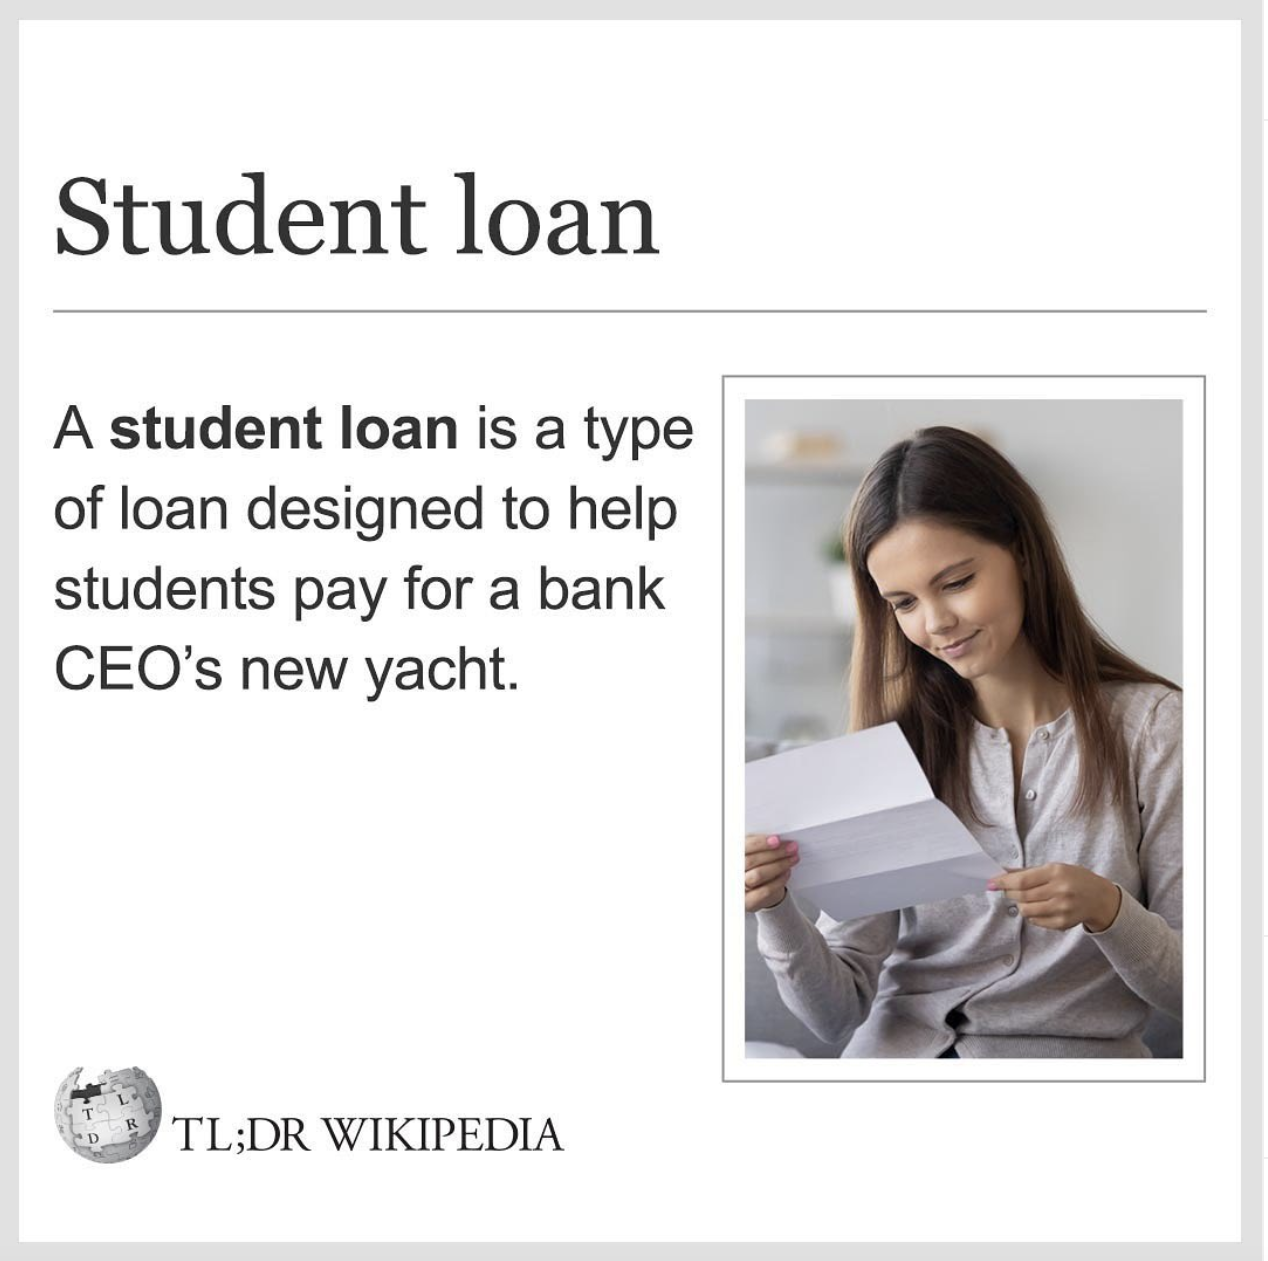 Wikipedia Memes - best - Student loan A student loan is a type of loan designed to help students pay for a bank Ceo's new yacht. Tl;Dr Wikipedia